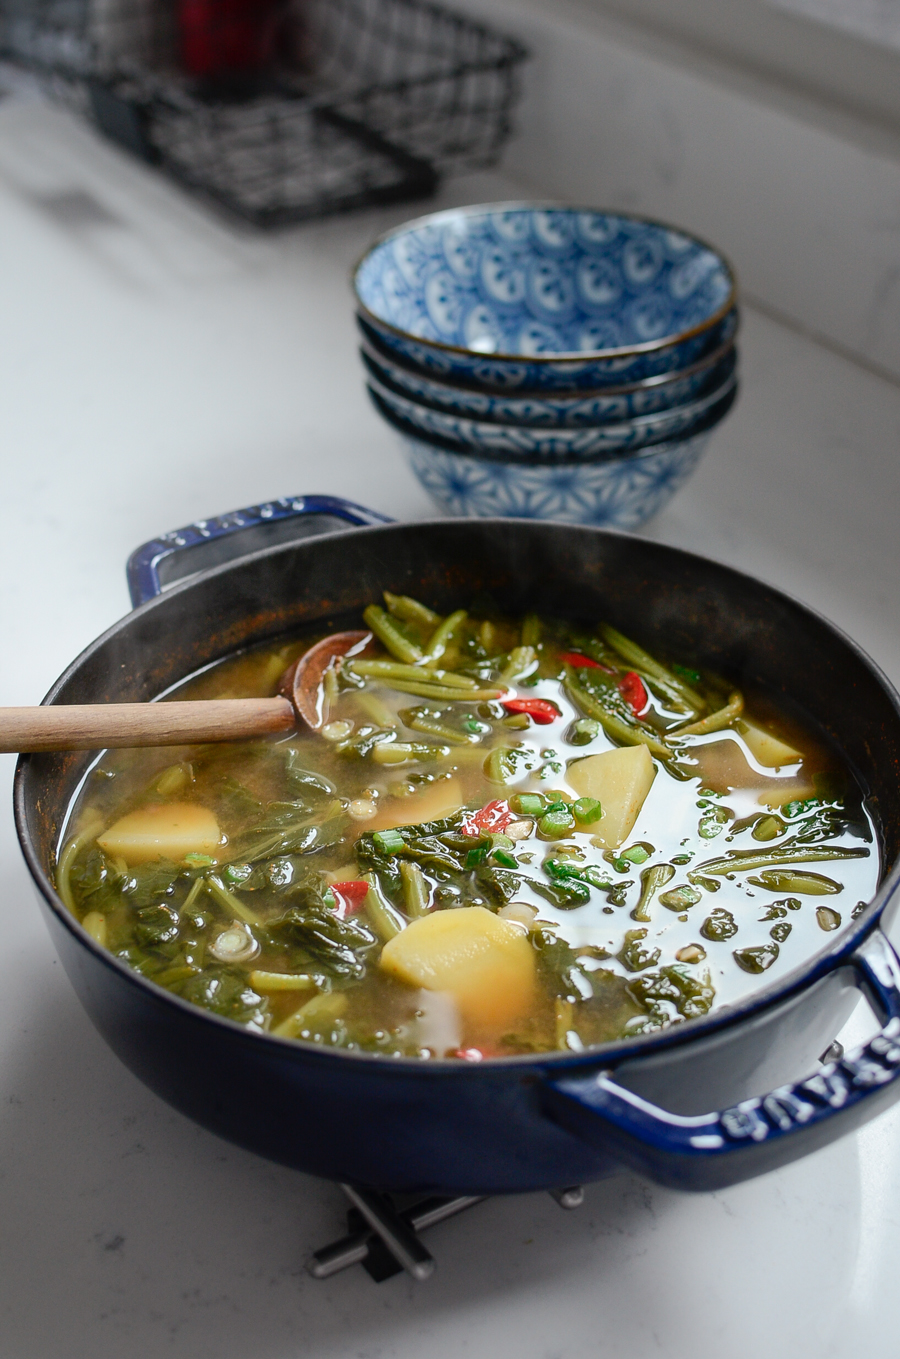 Turnip green and potato are made to a soup in a blue pot.